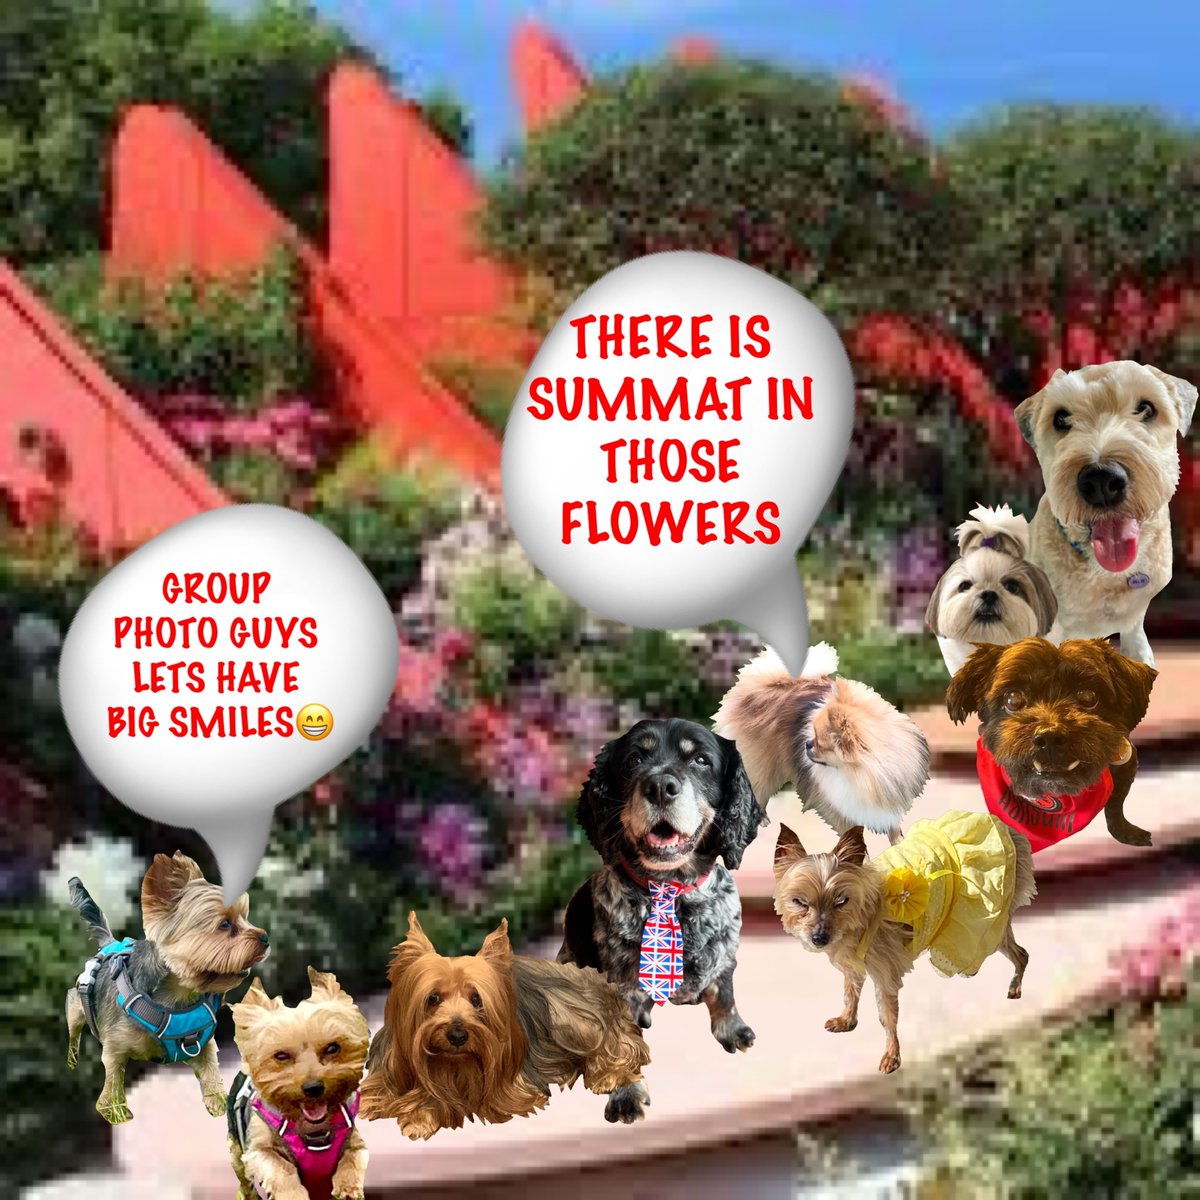 12 #zzst 🌺💐🪻🪷🌻🌷🌹🌸🌼🌺💐🪻🪷🌻🌷 OH LORD - BILLY WANTS A PHOTO FOR HIS ALBUM.... BUT THERE IS SOMTHING IN THOSE FLOWERS BETTER SORT THE ZOMBIE OUT FIRST YEHHHHHH